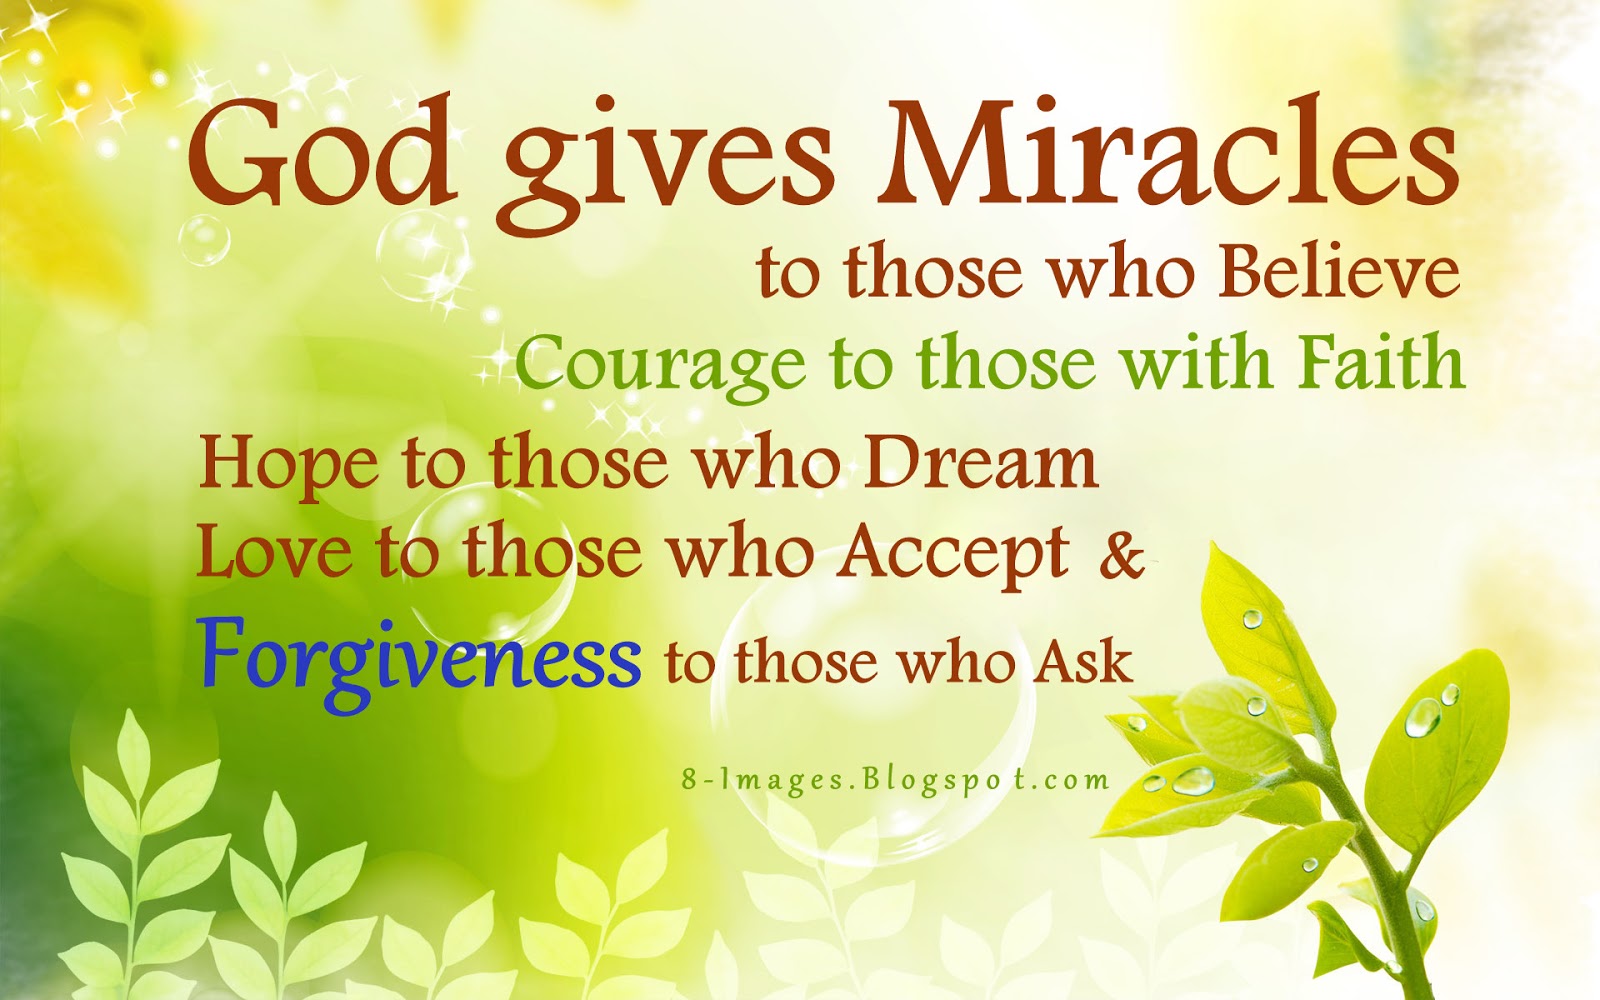 God gives Miracles to those who Believe Courage to those with Faith Hope to those who Dream Love to those who Accept and Forgiveness to those who Ask